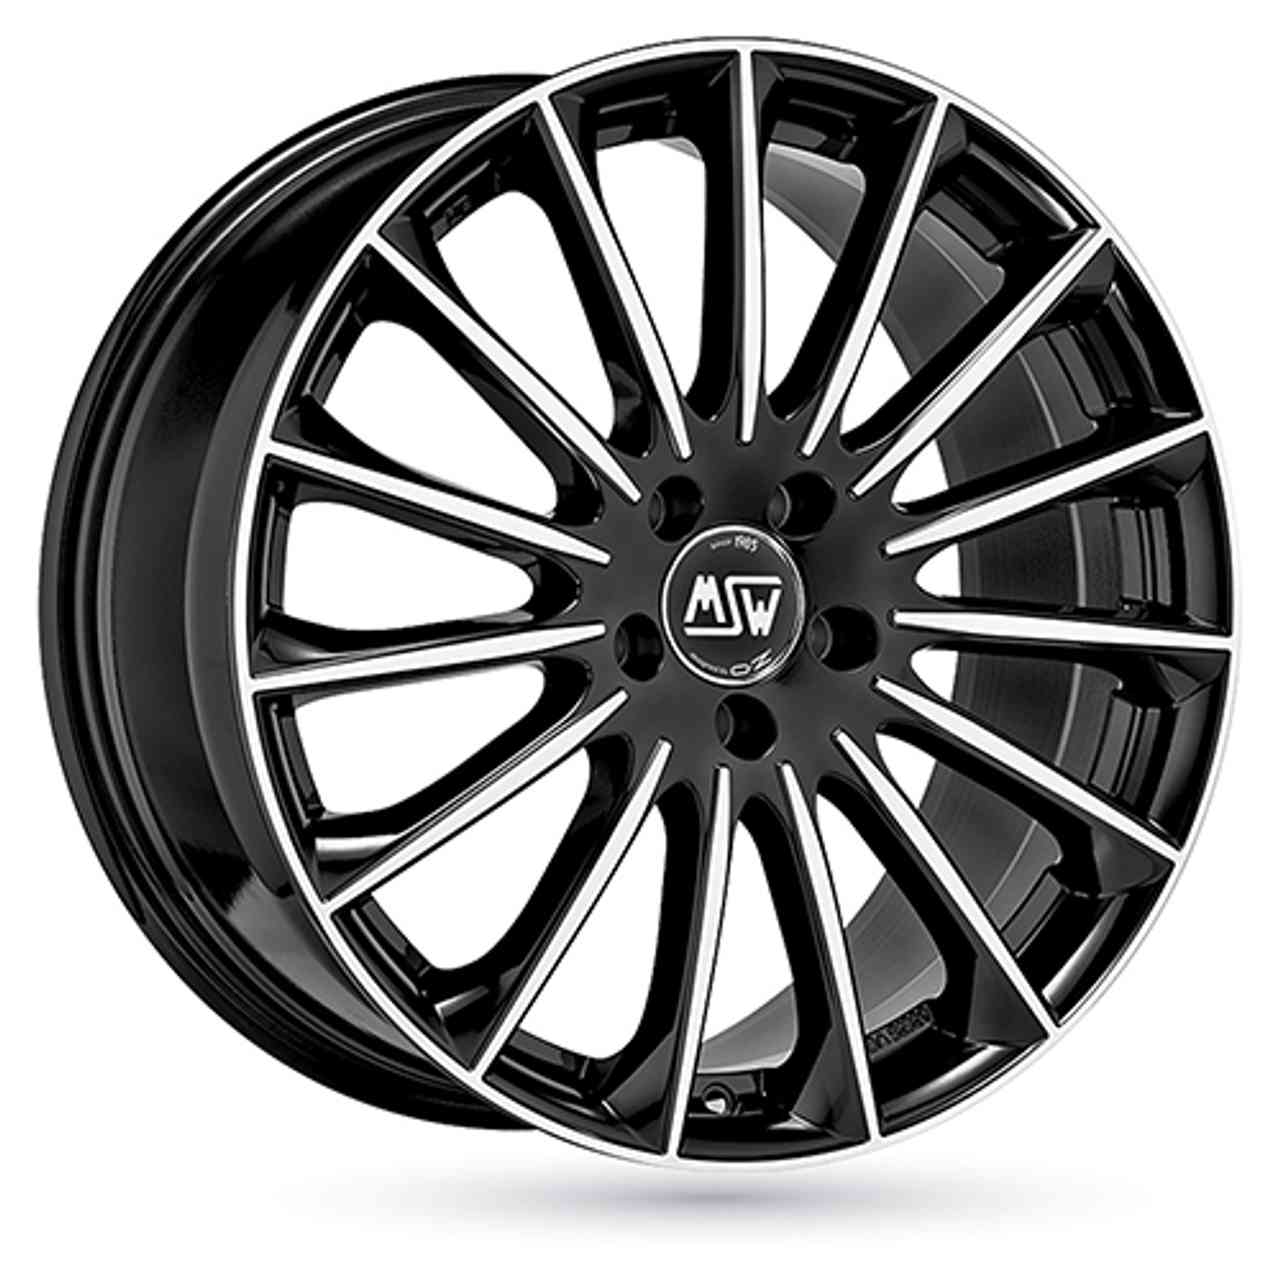 MSW (OZ) MSW 30 gloss black full polished 7.5Jx17 5x108 ET38